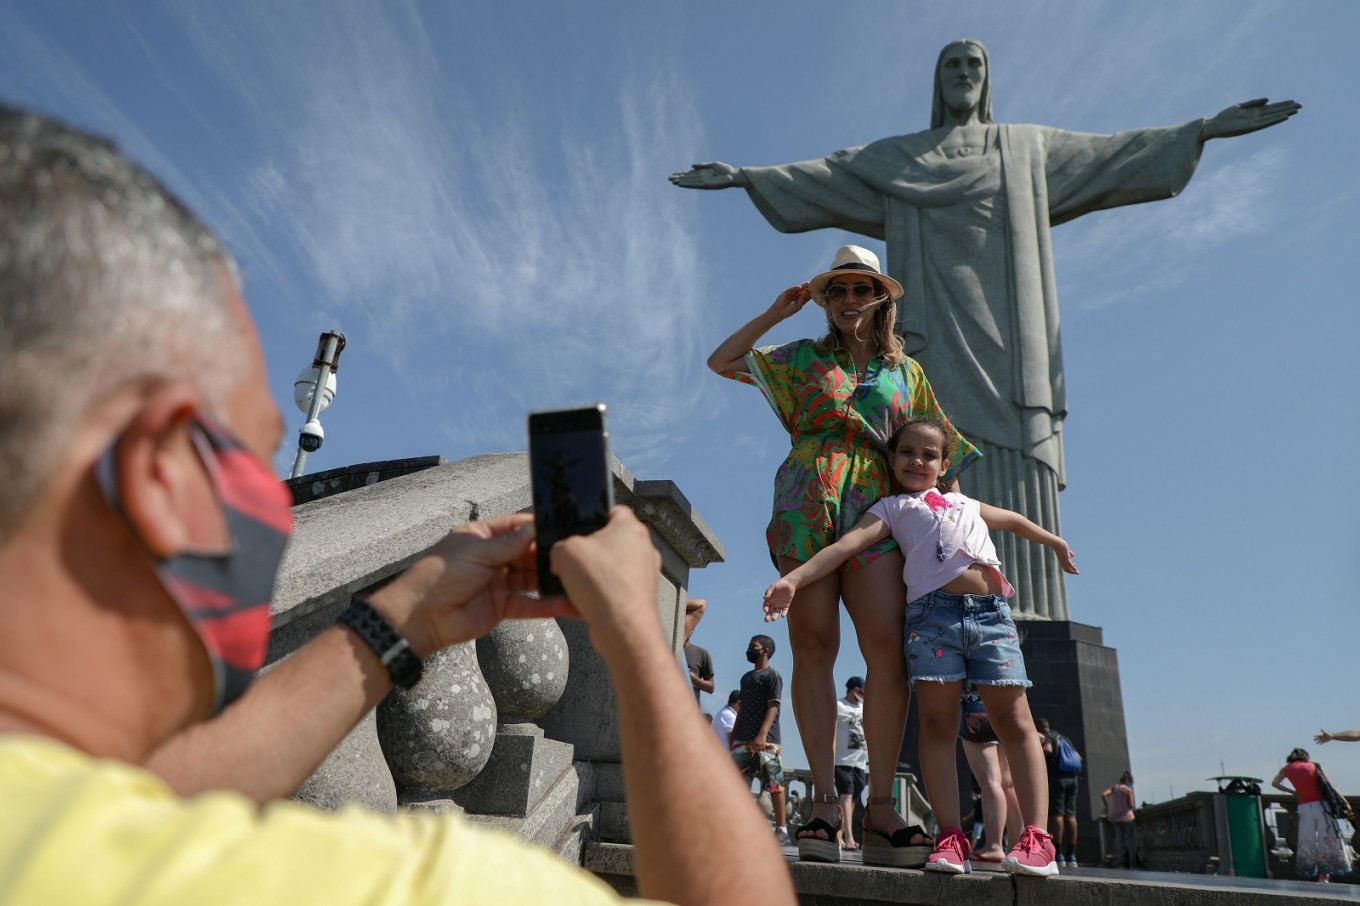 Rio Reopens Christ The Redeemer Other Sites After Virus Closure News The Jakarta Post